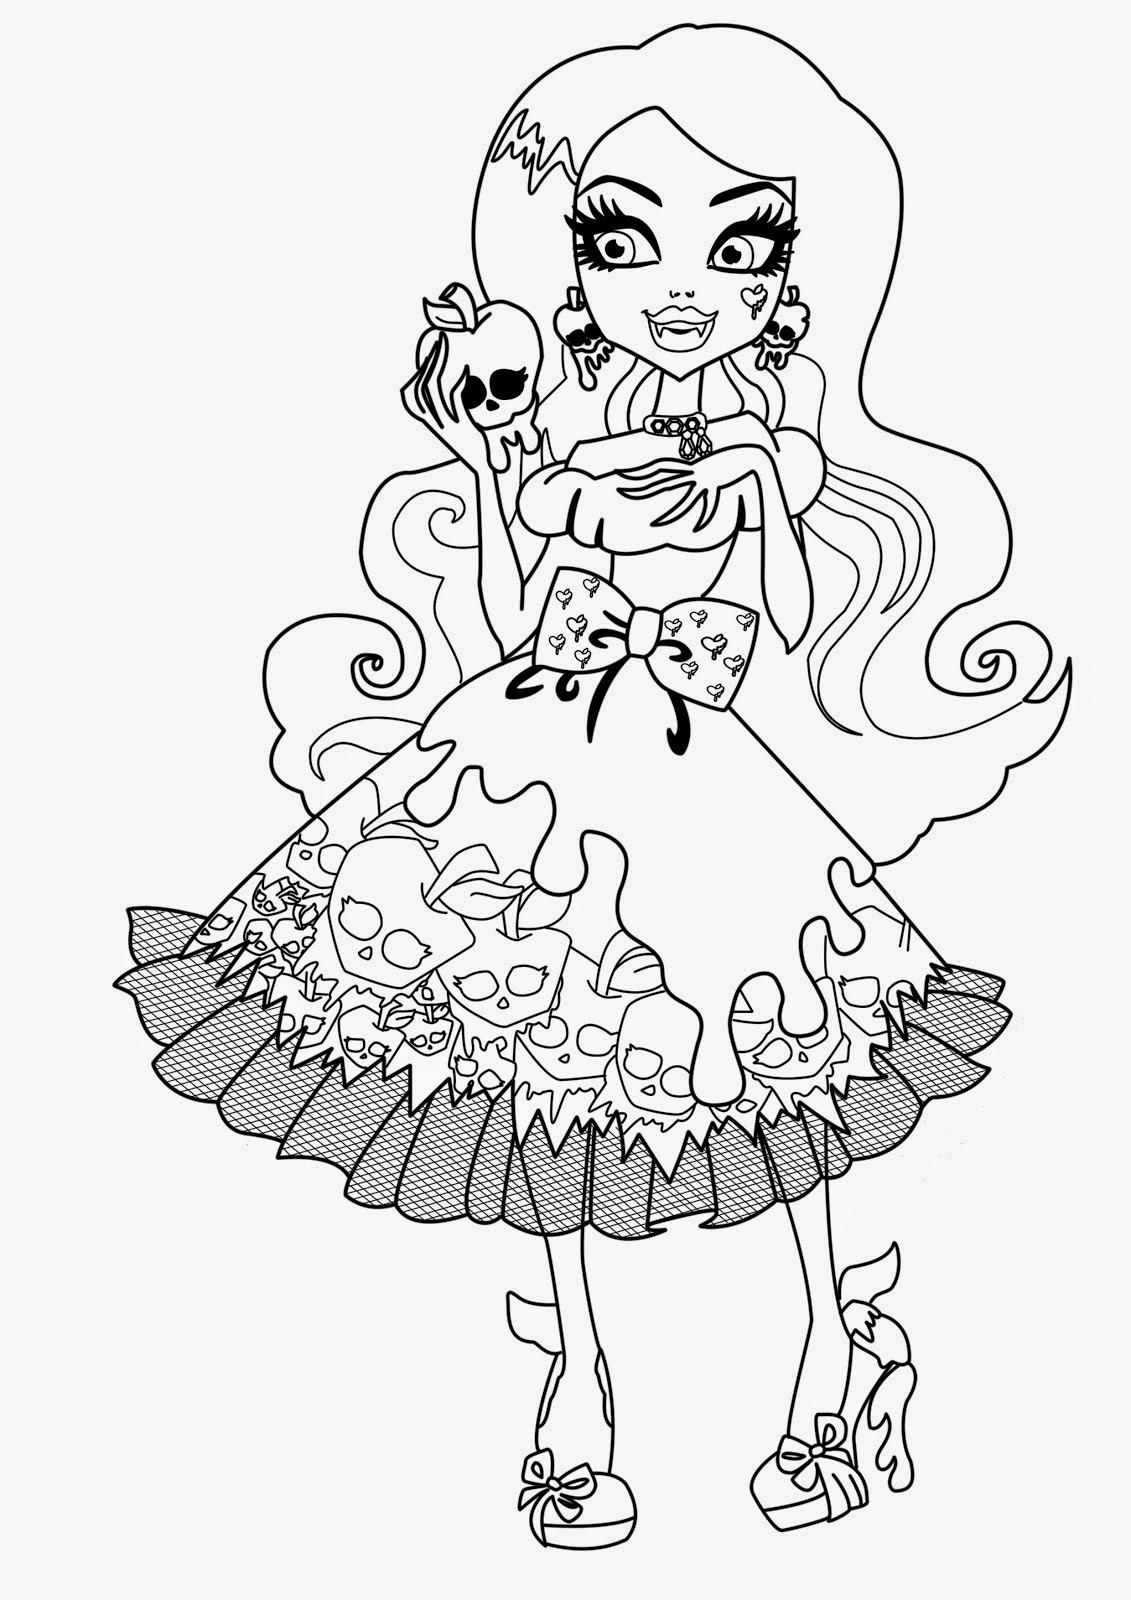 Monster High coloring page